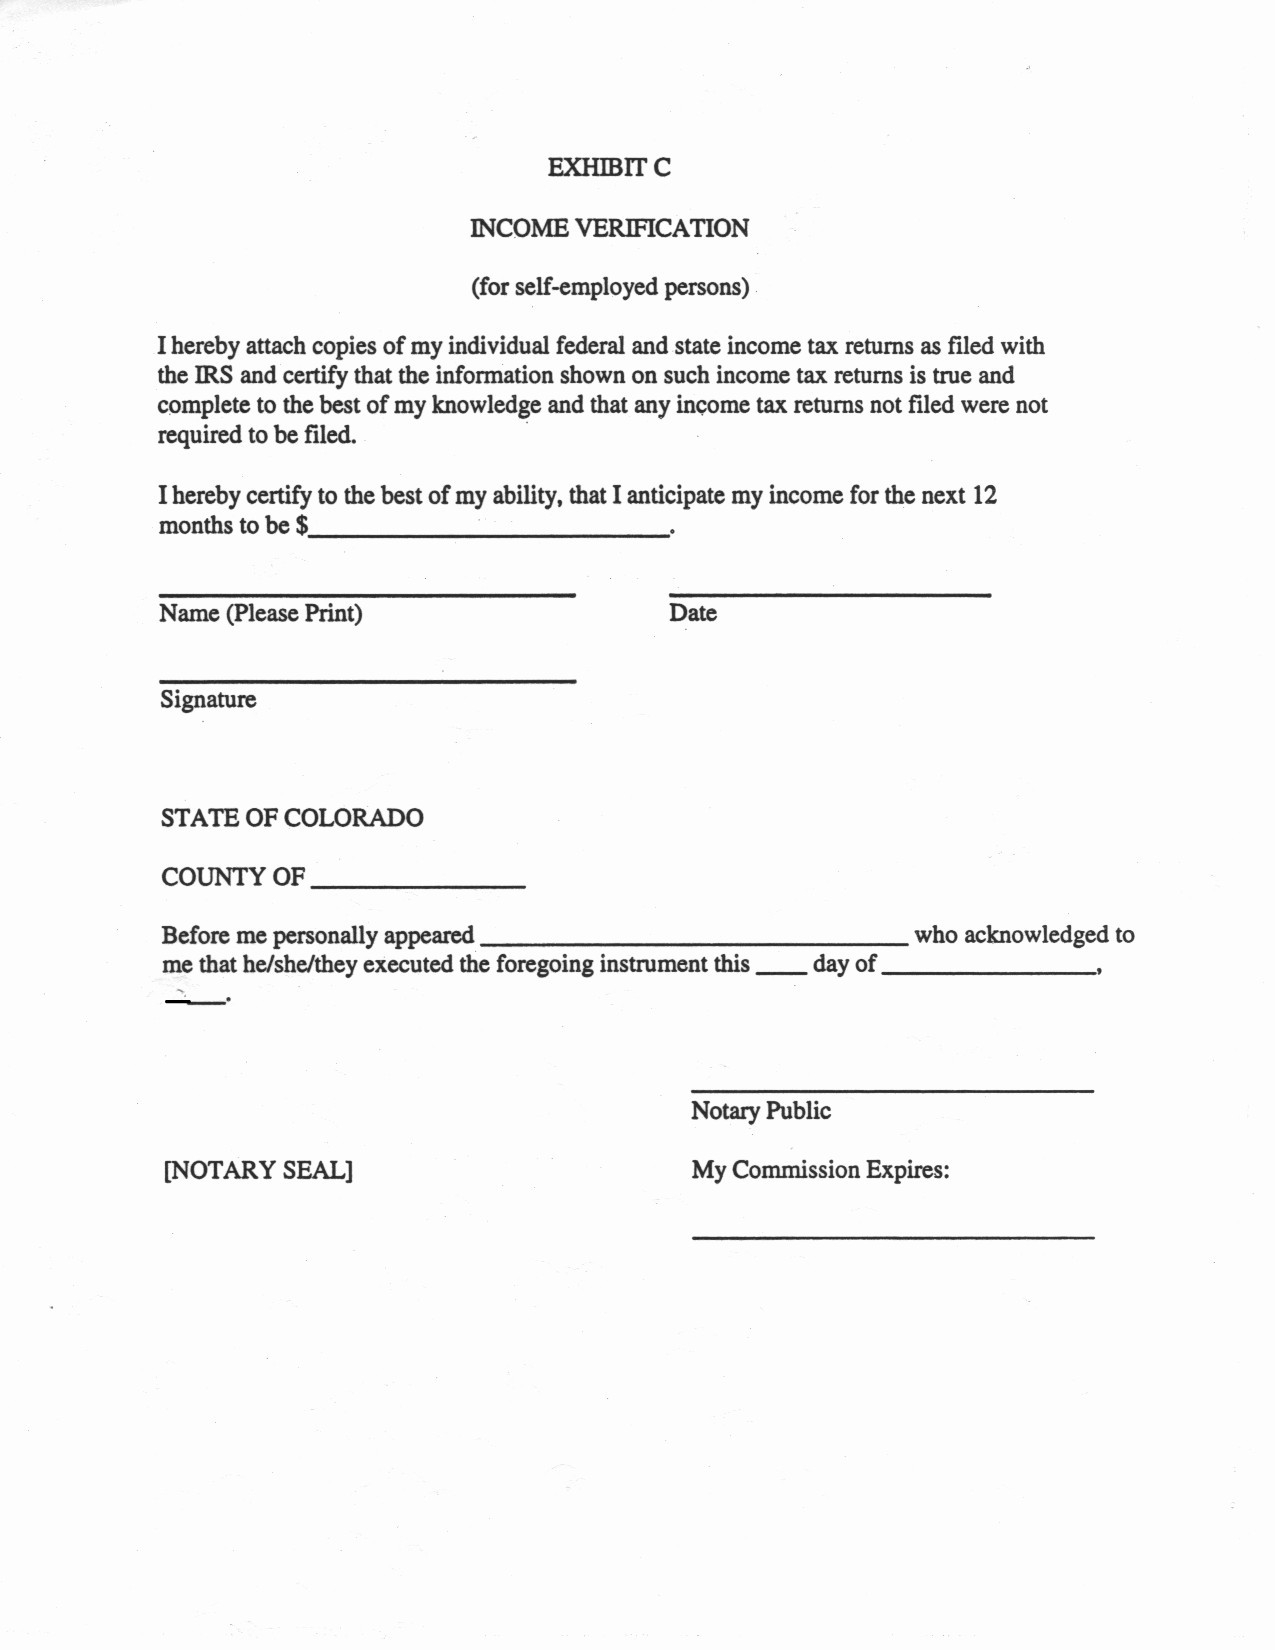 notarized employment verification letter template example-Luxury In e Verification Letter Sample 13-o